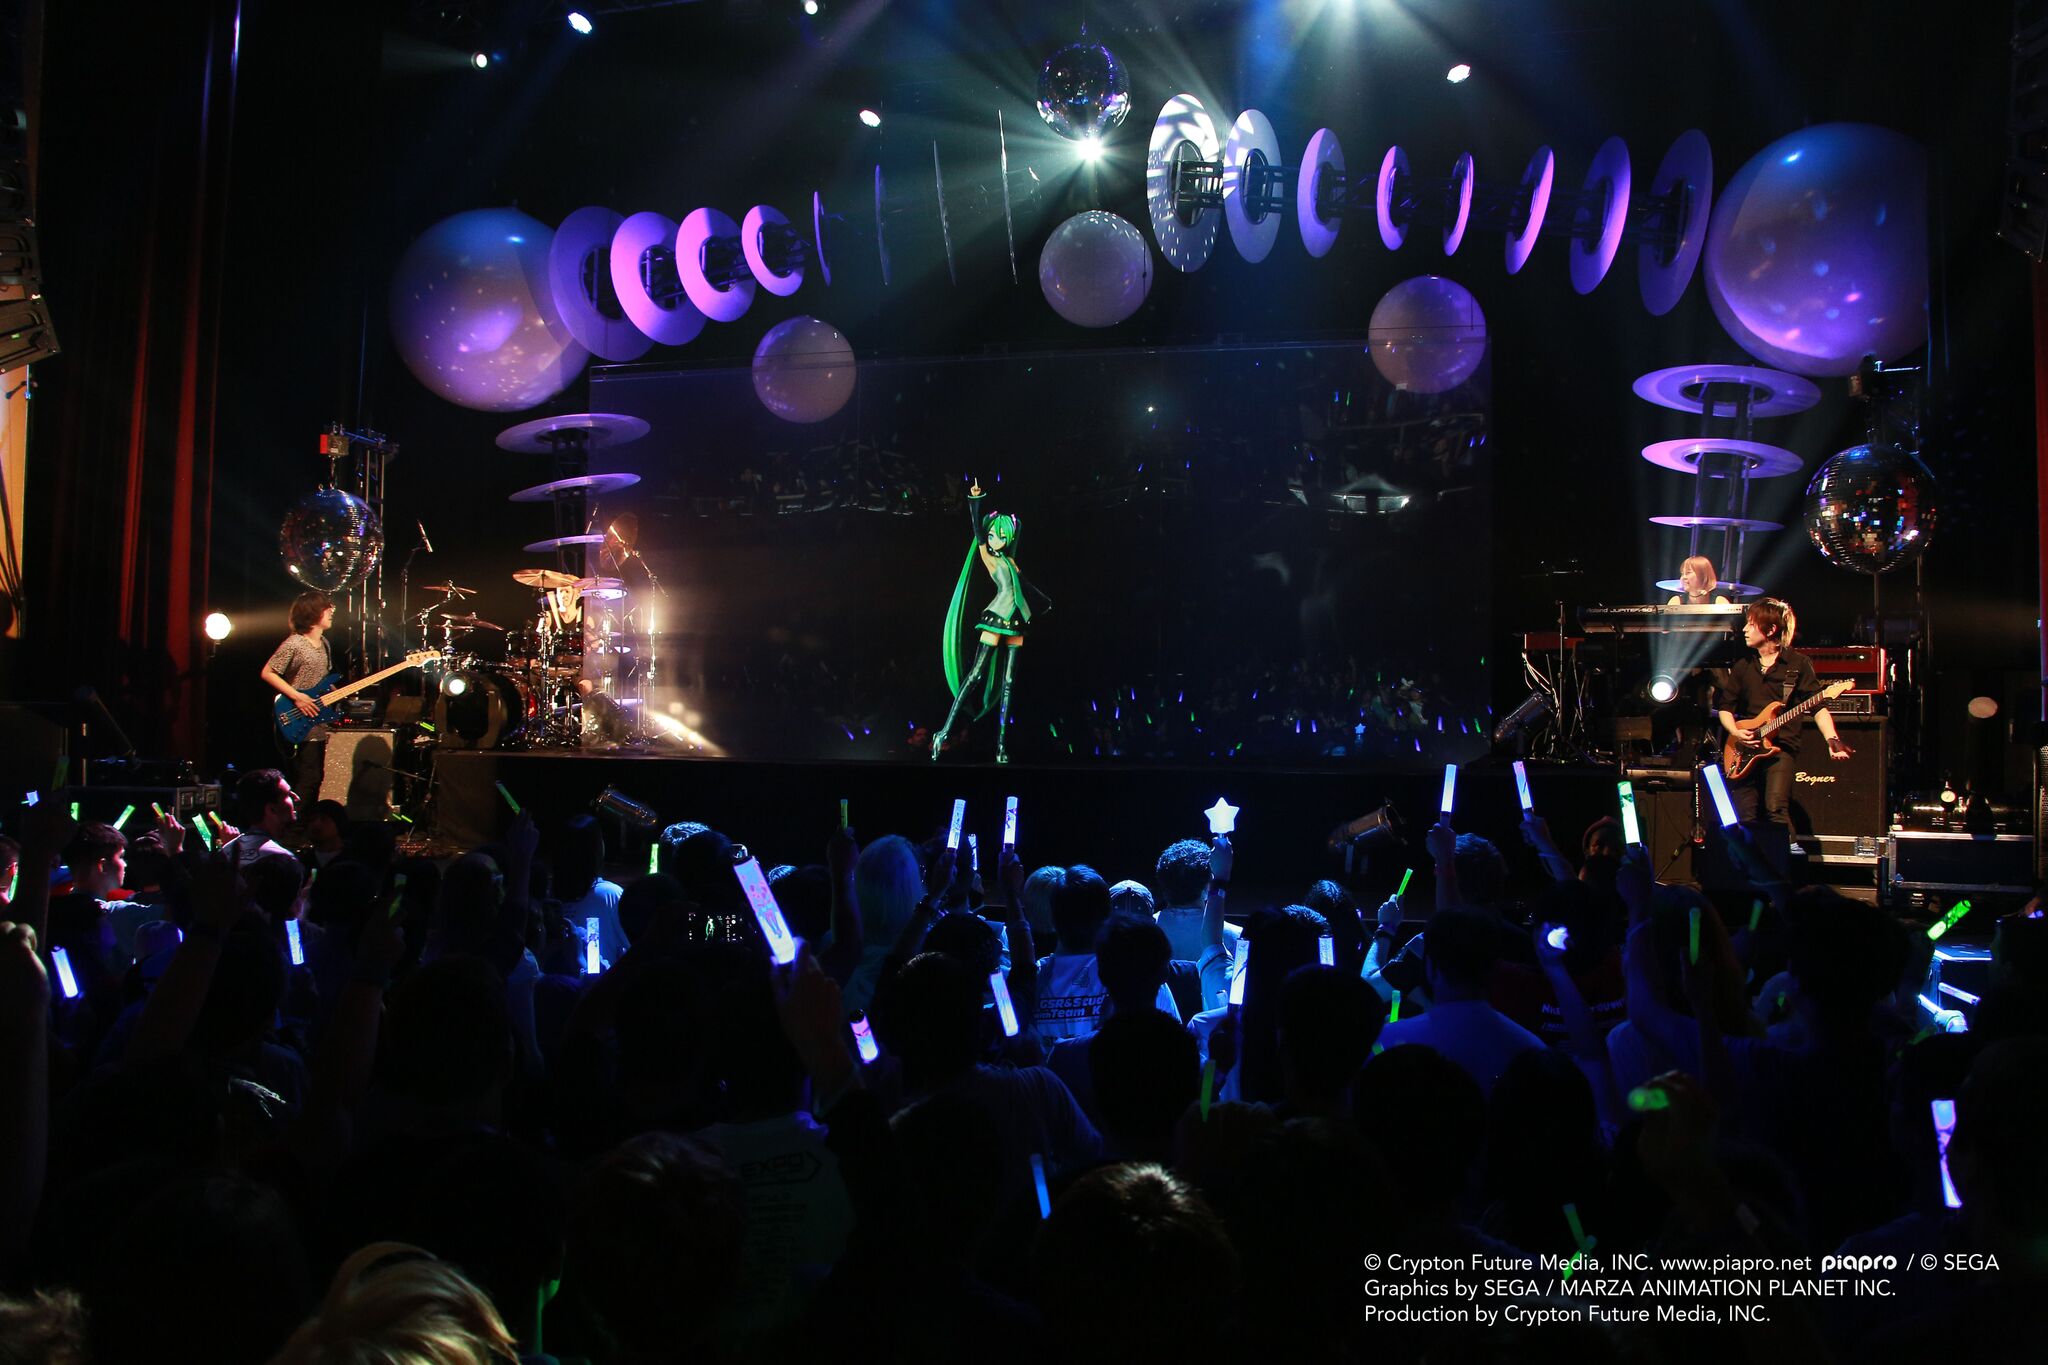 [Concert Recap] Why It’s Impossible to Hate Hatsune Miku